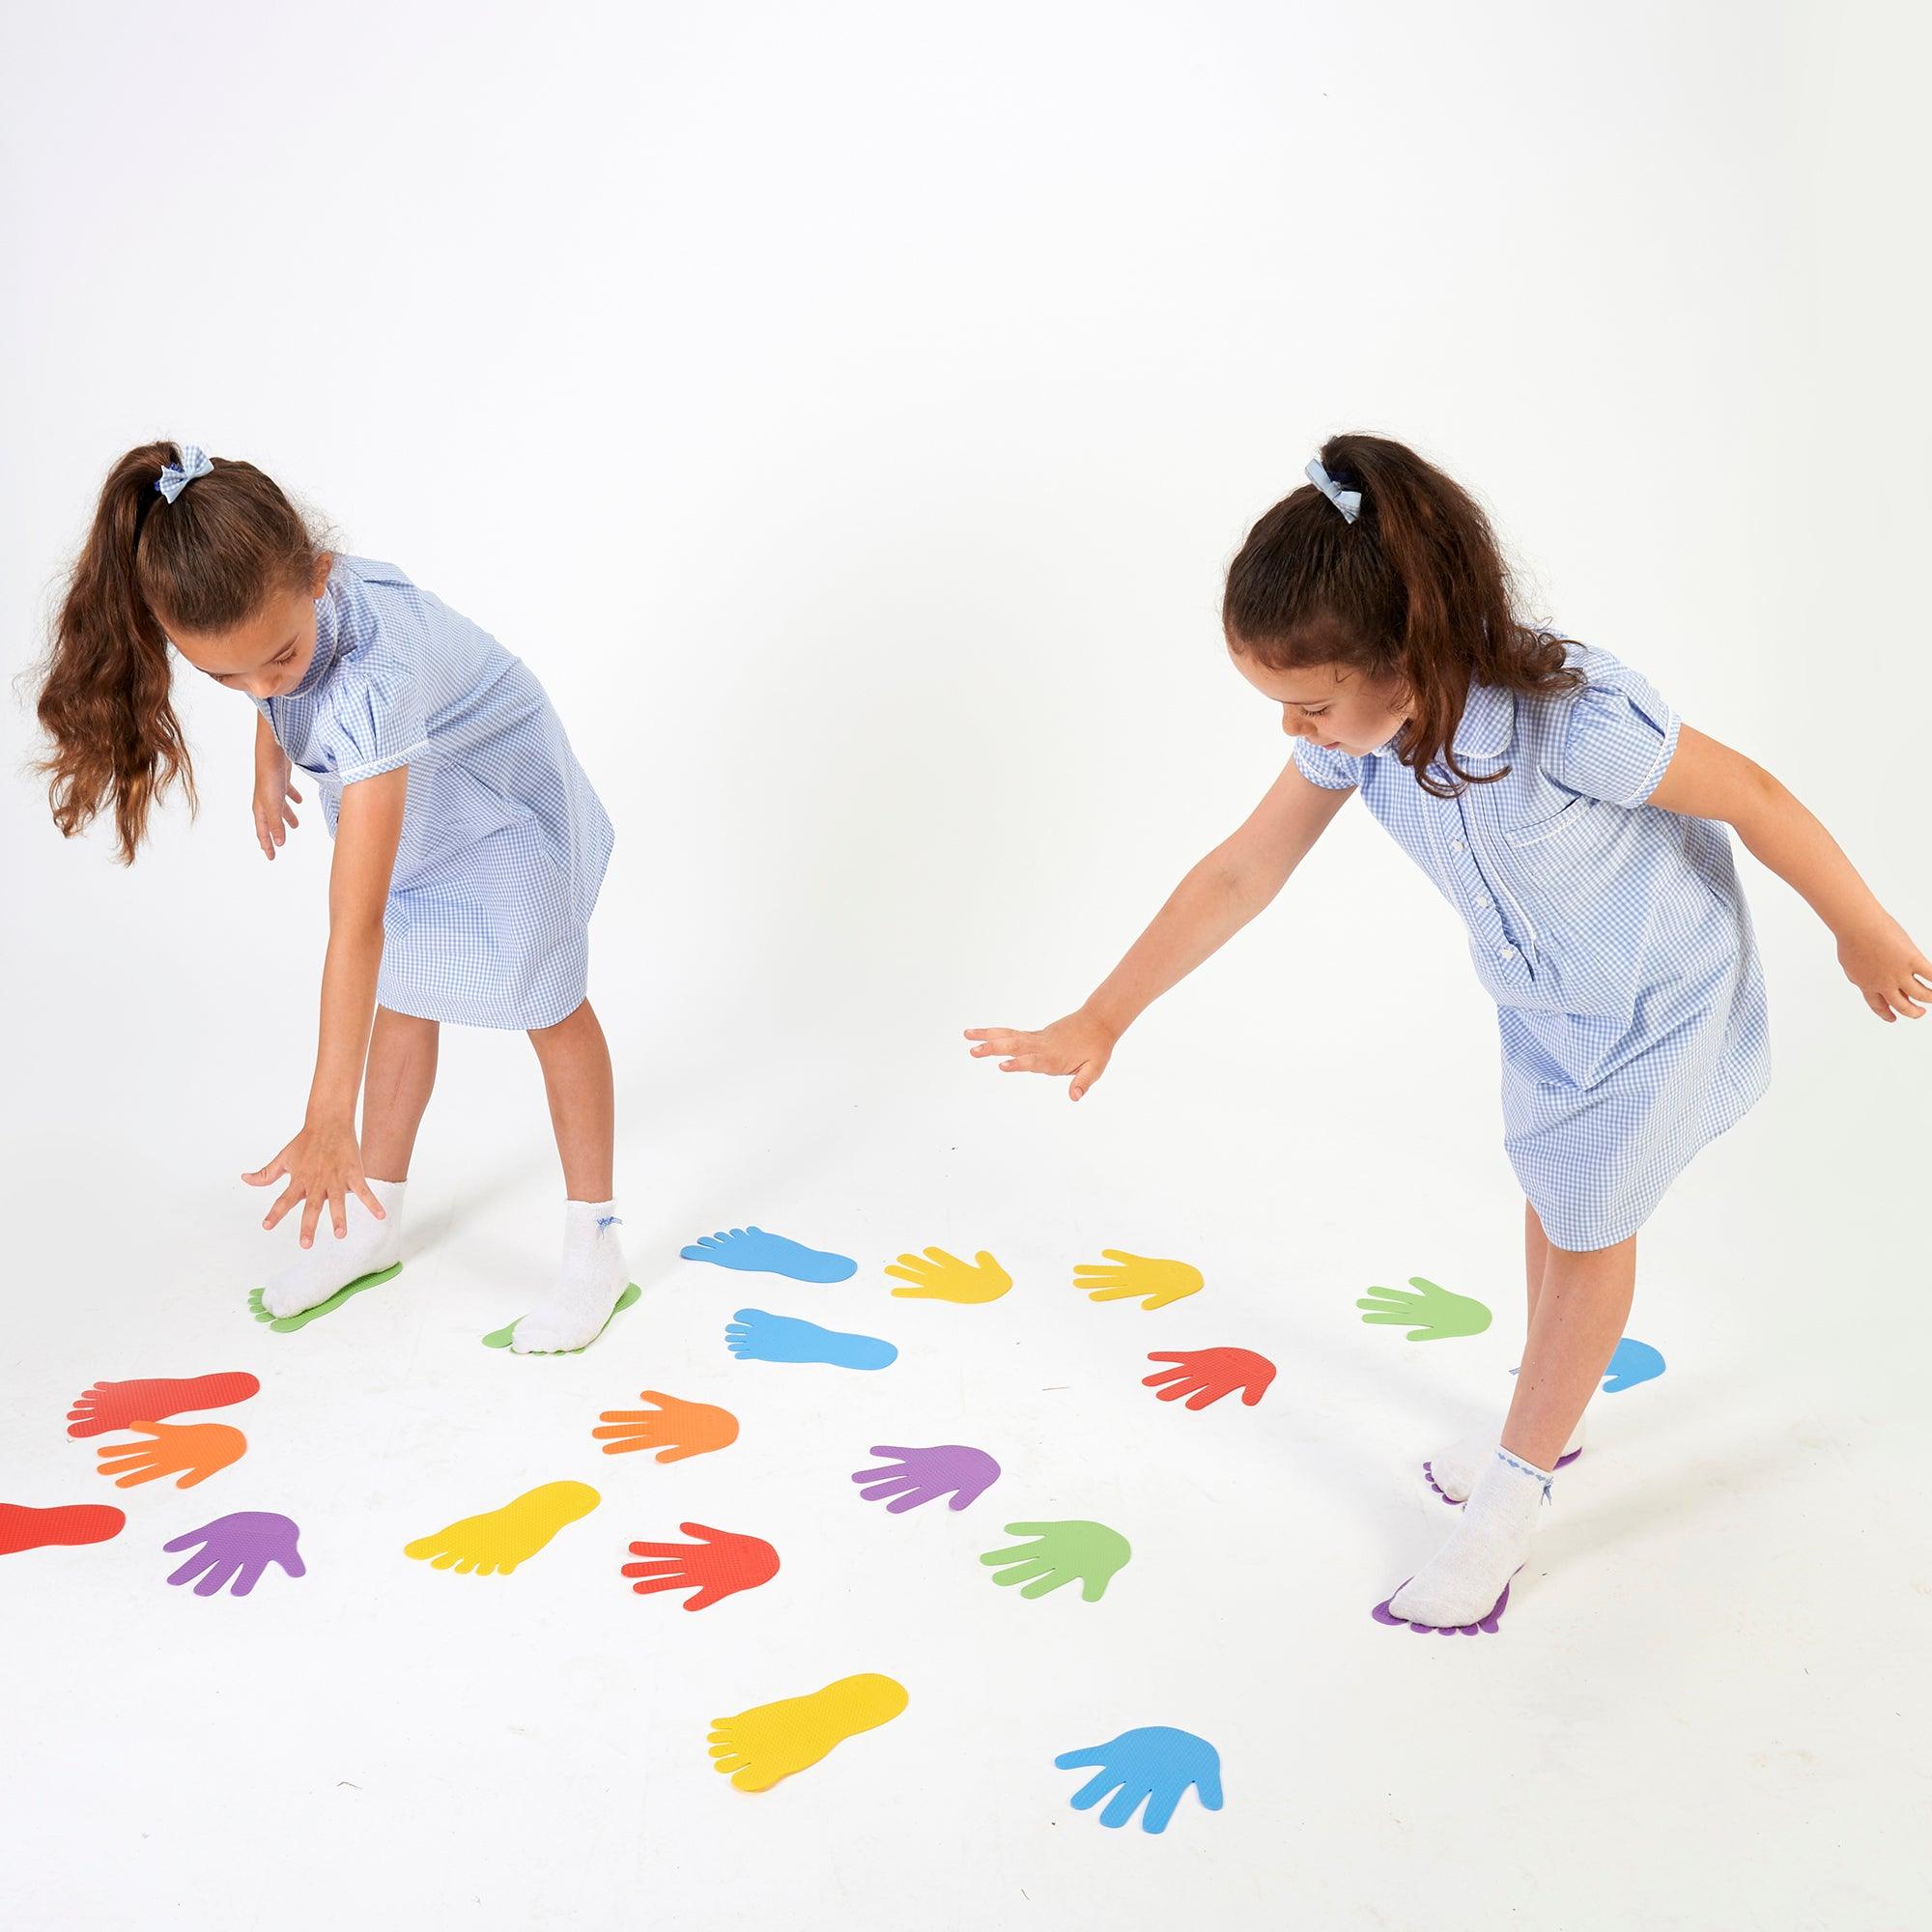 12 Pack Hand Markers, These Hand shaped Floor Hand Markers come in a set of 12 in assorted colours. Hand Markers are ideal for setting up activity courses in the gymnasium or classroom environment. Durable construction with non slip surface finish. The Hand Markers are a vibrant and engaging set of assorted colours,use with other designs of floor markers to create an engaging course environment. The Hand floor markers are popular for multiple activities to help lay out fun physical activities and challenges